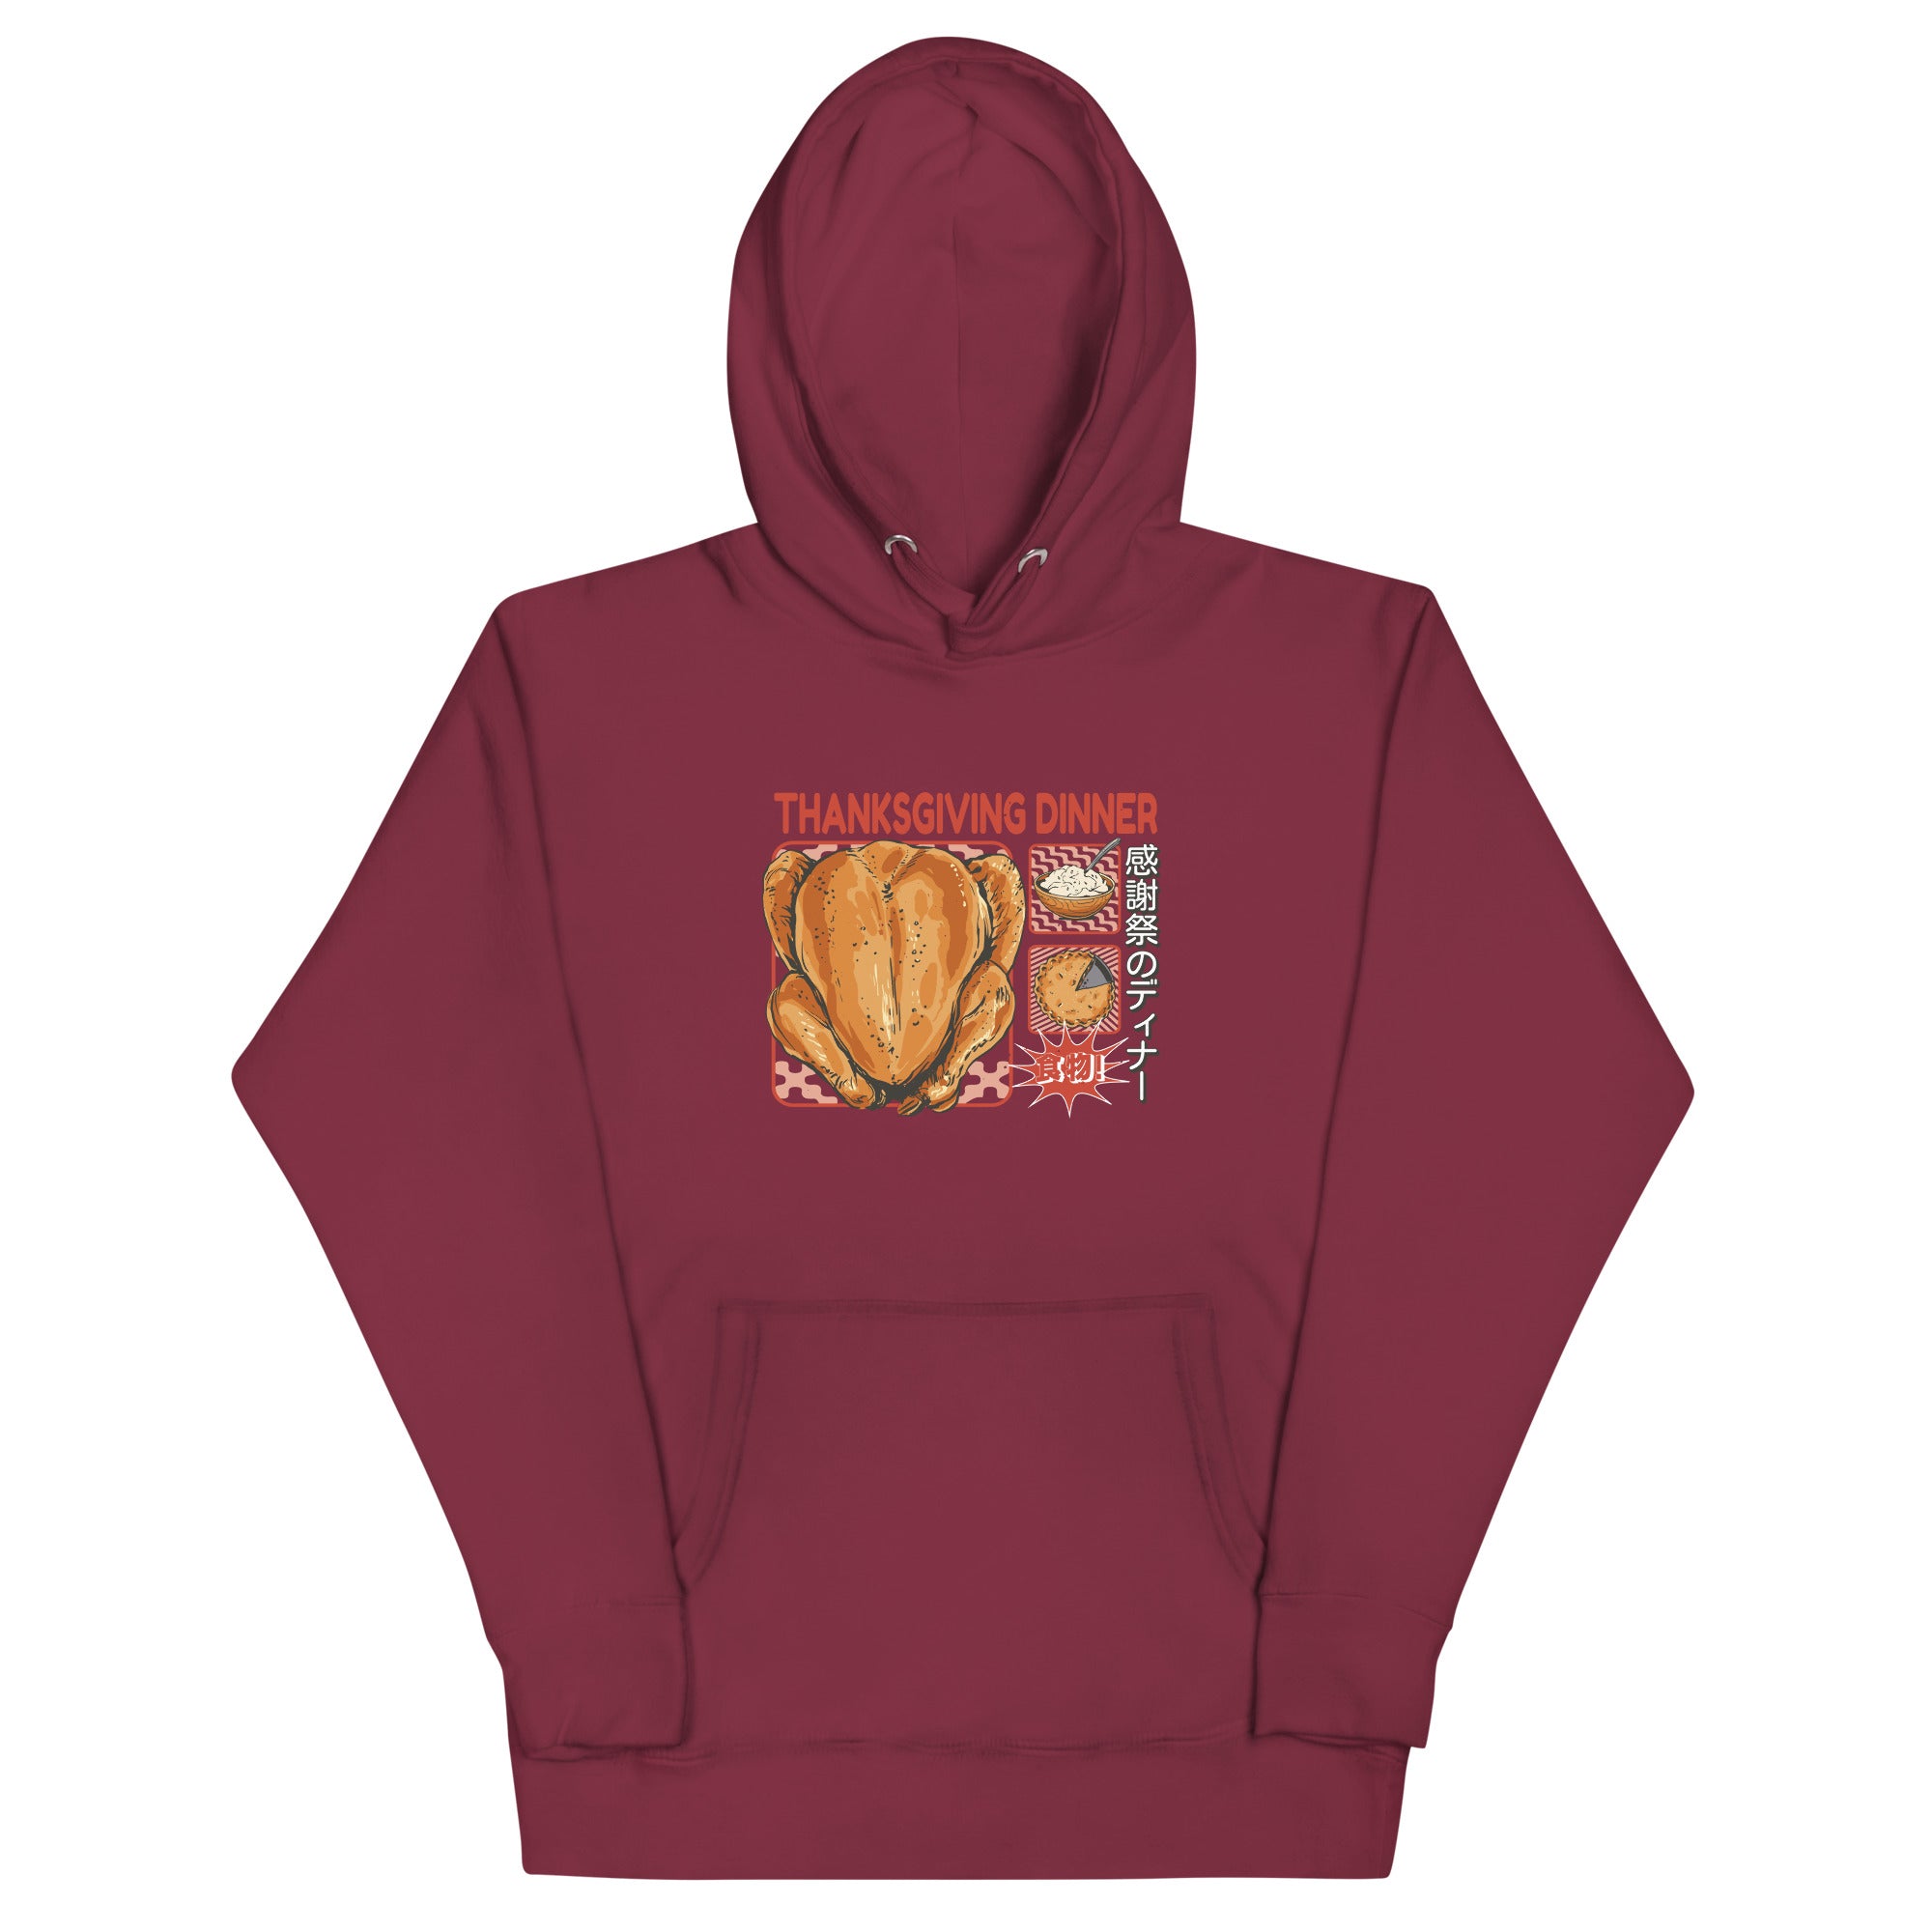 Front of Japanese Thanksgiving Hoodie in Maroon: The front view of a maroon hoodie showcasing a beautifully illustrated Japanese Thanksgiving graphic, complete with a roast chicken, Japanese potato salad, and an apple pie.